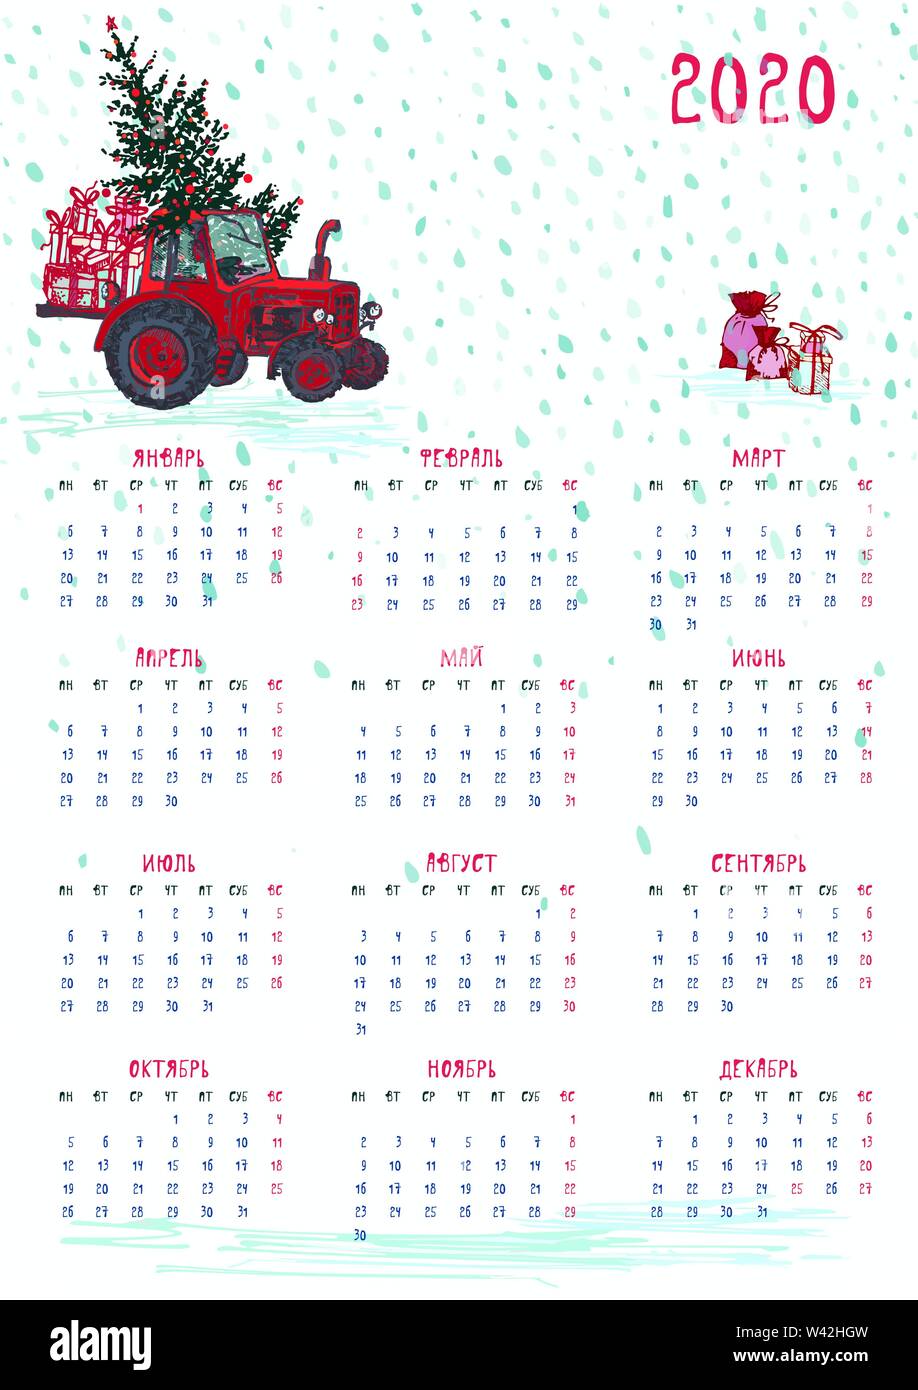 russian christmas calendar 2020 2020 Calendar Planner Whith Red Christmas Tractor New Year Tree And Celebrateted Gifts Xmas Theme Week Starts On Monday Russian Language Texts Sca Stock Vector Image Art Alamy russian christmas calendar 2020